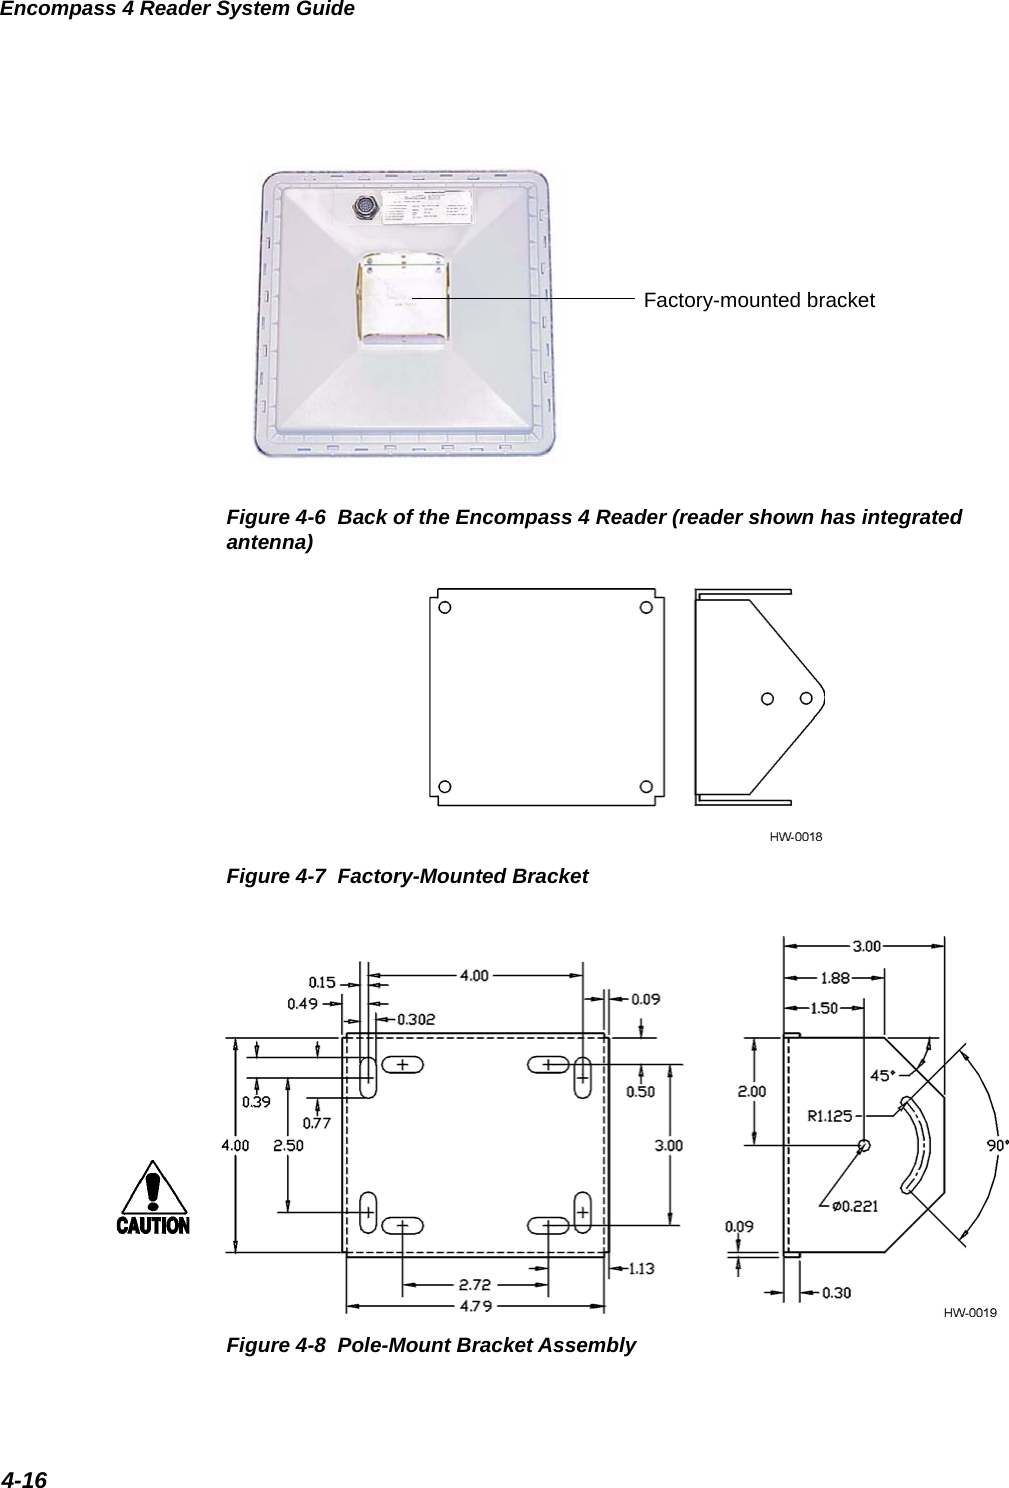 Factory-mounted bracketEncompass 4 Reader System Guide4-16Figure 4-6  Back of the Encompass 4 Reader (reader shown has integrated antenna)Figure 4-7  Factory-Mounted BracketFigure 4-8  Pole-Mount Bracket Assembly